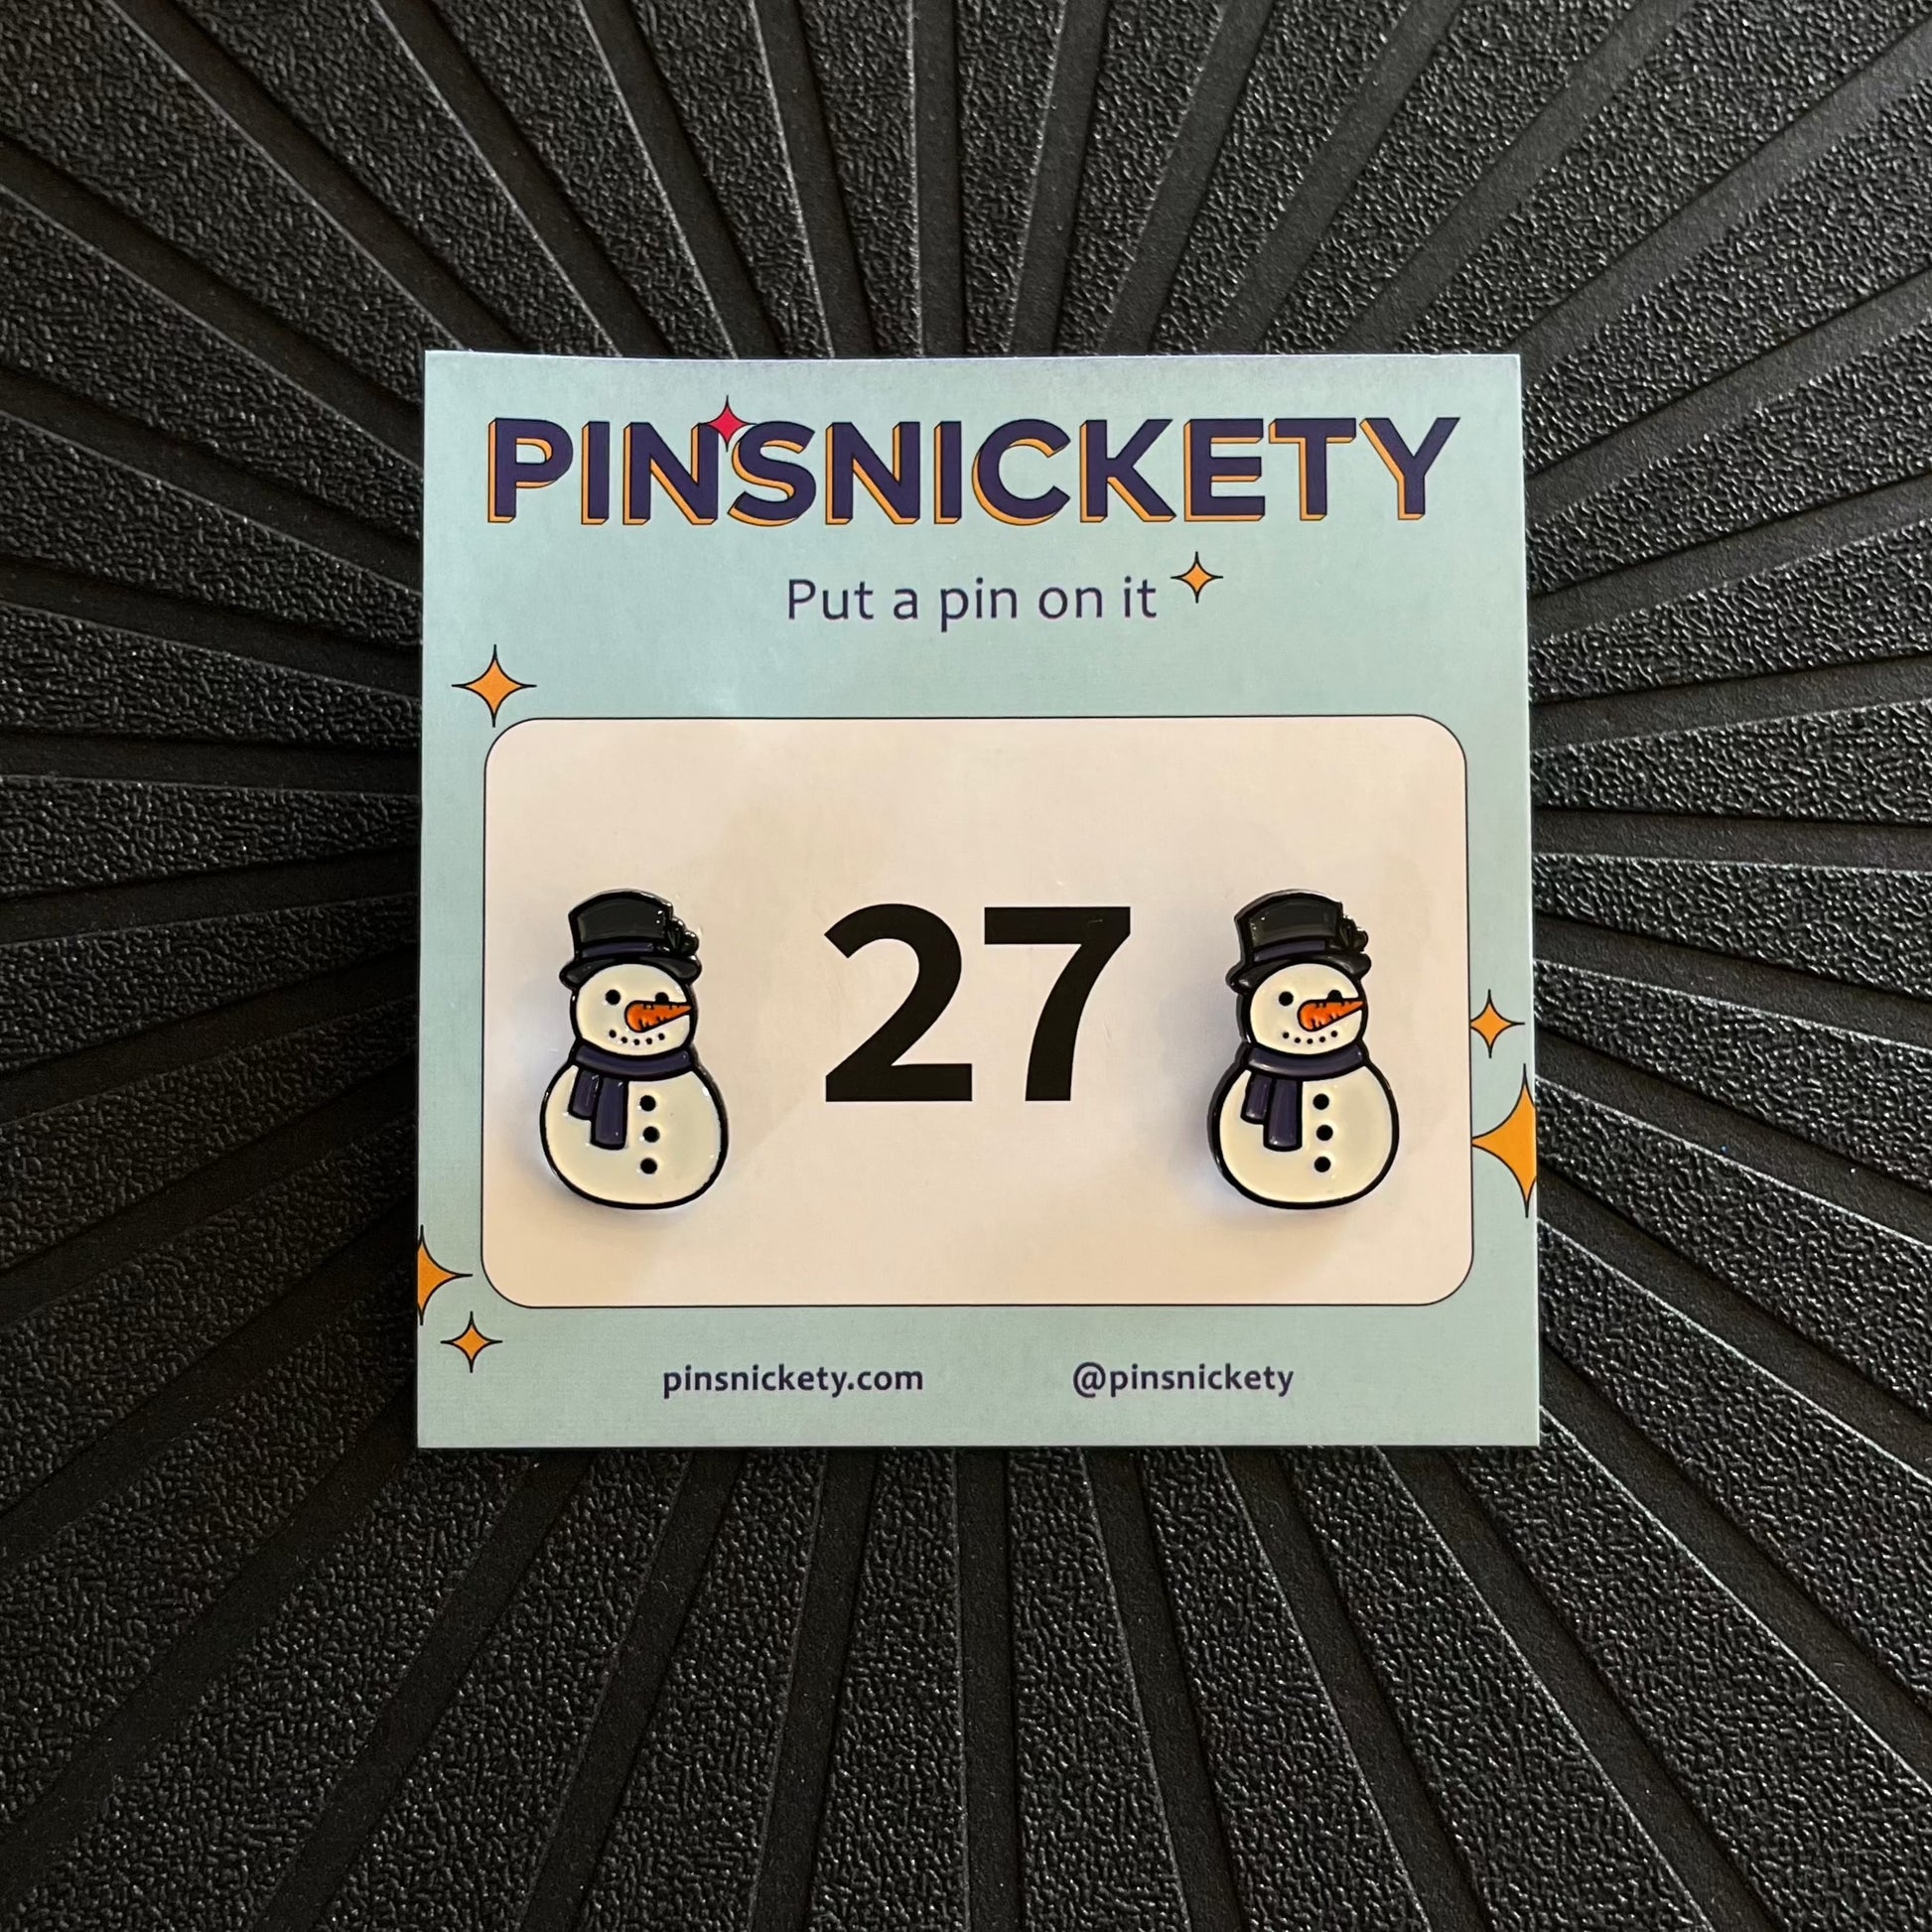 pinsnickety snowman horse show number pins on a black background